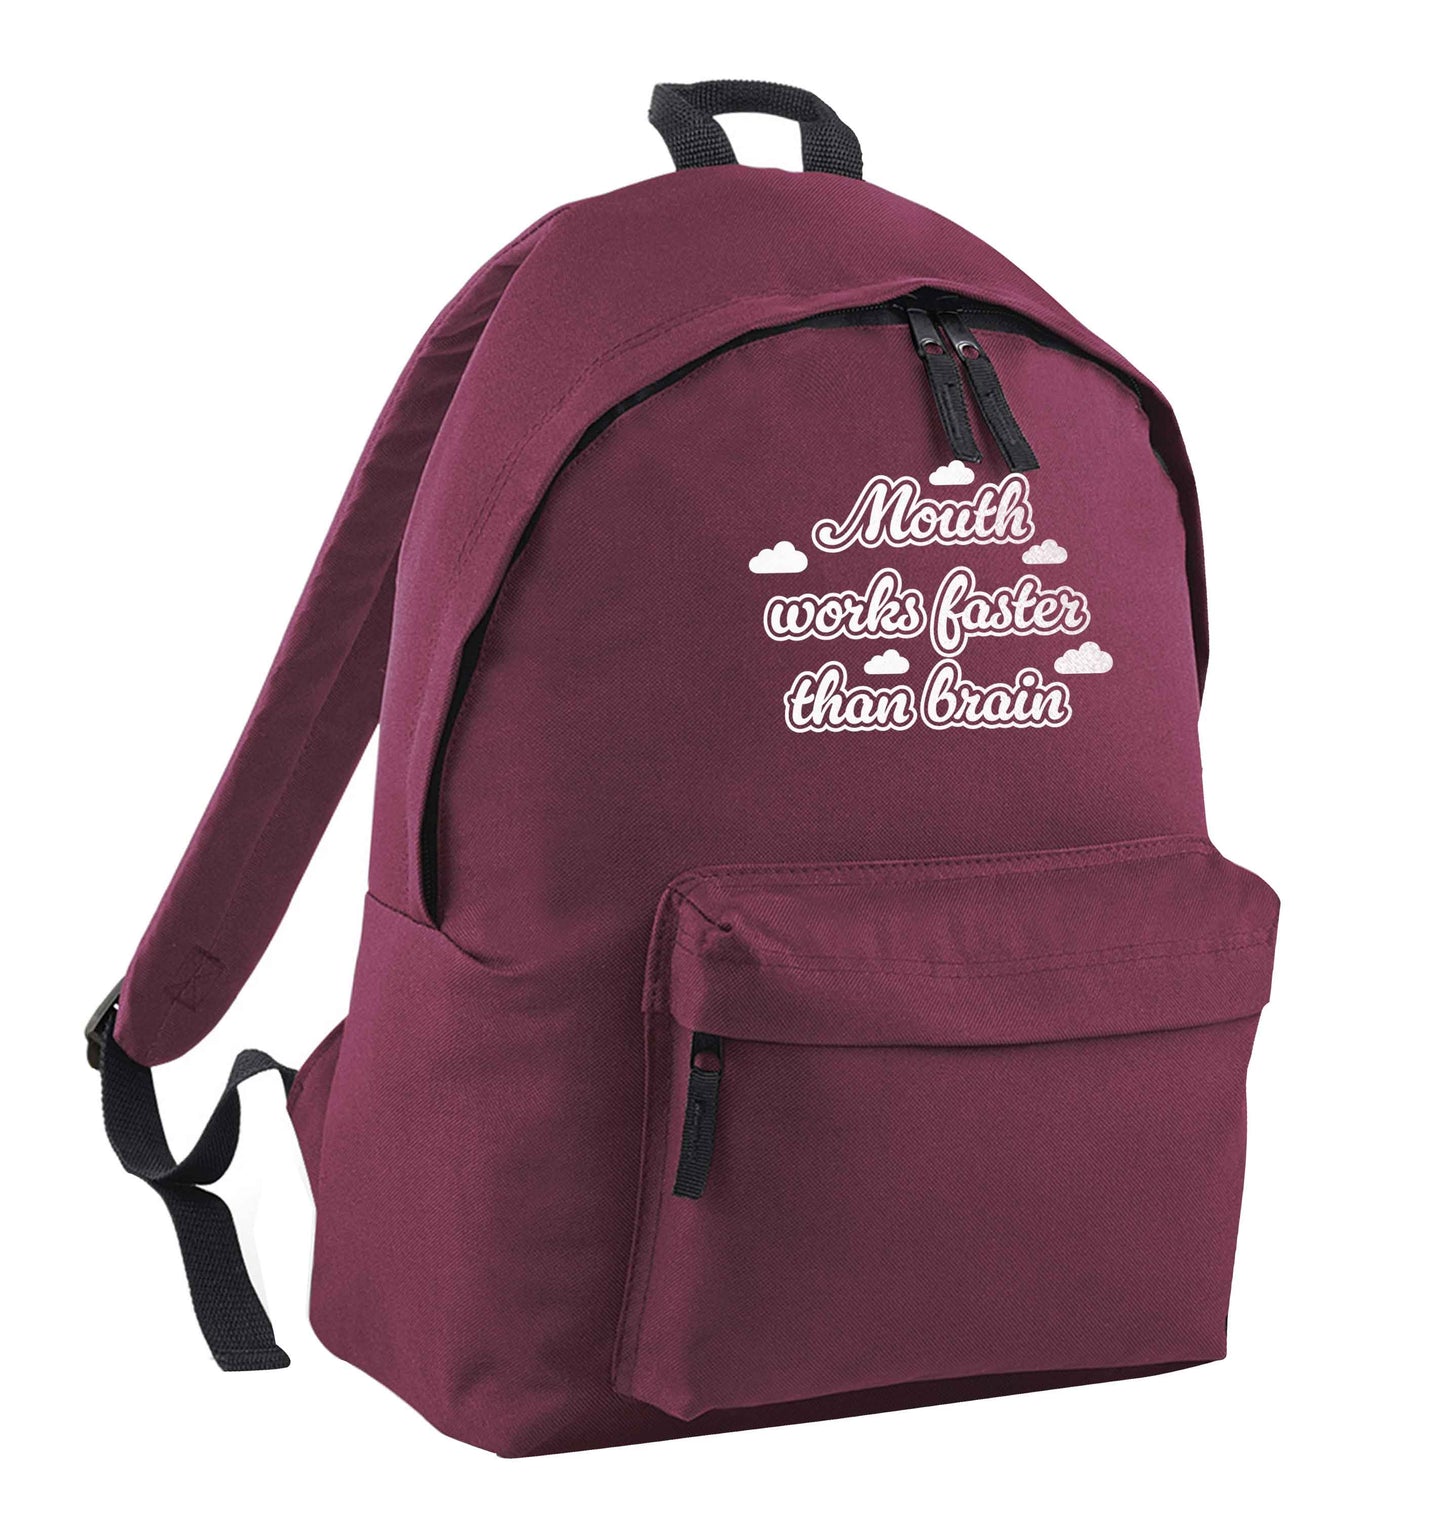 Mouth works faster than brain maroon adults backpack